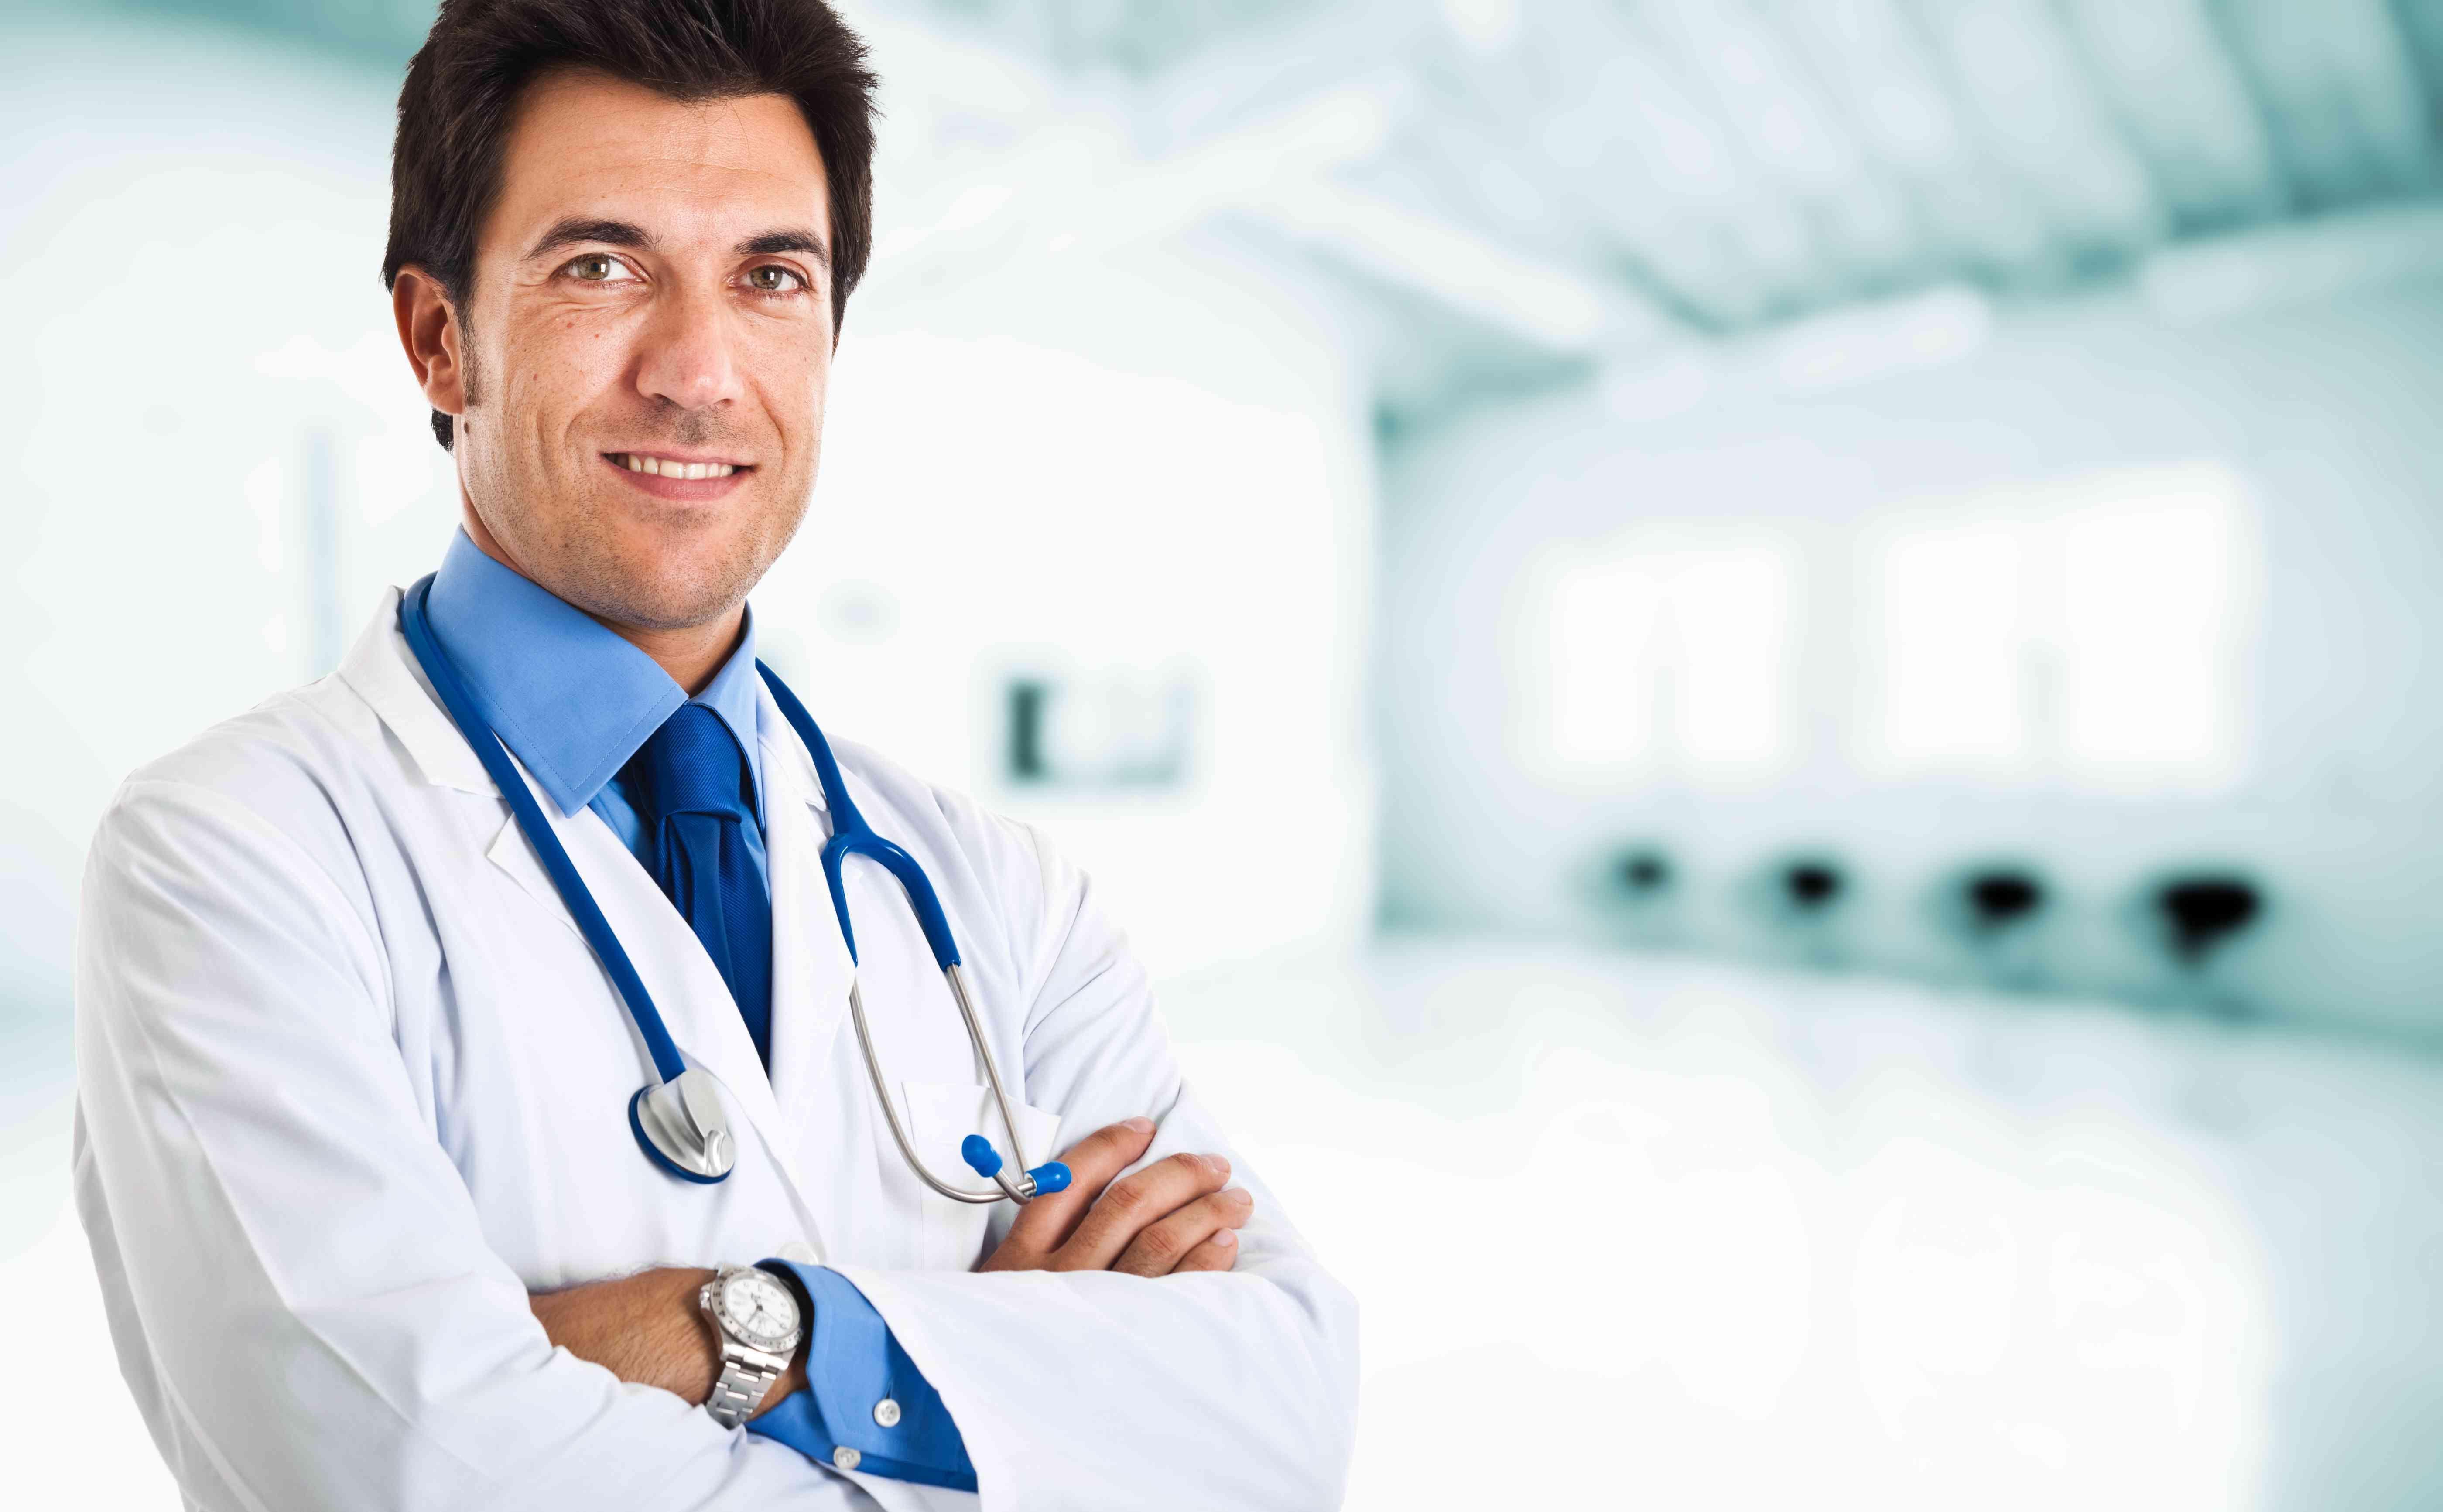 Physician Photos, Download The BEST Free Physician Stock Photos & HD Images